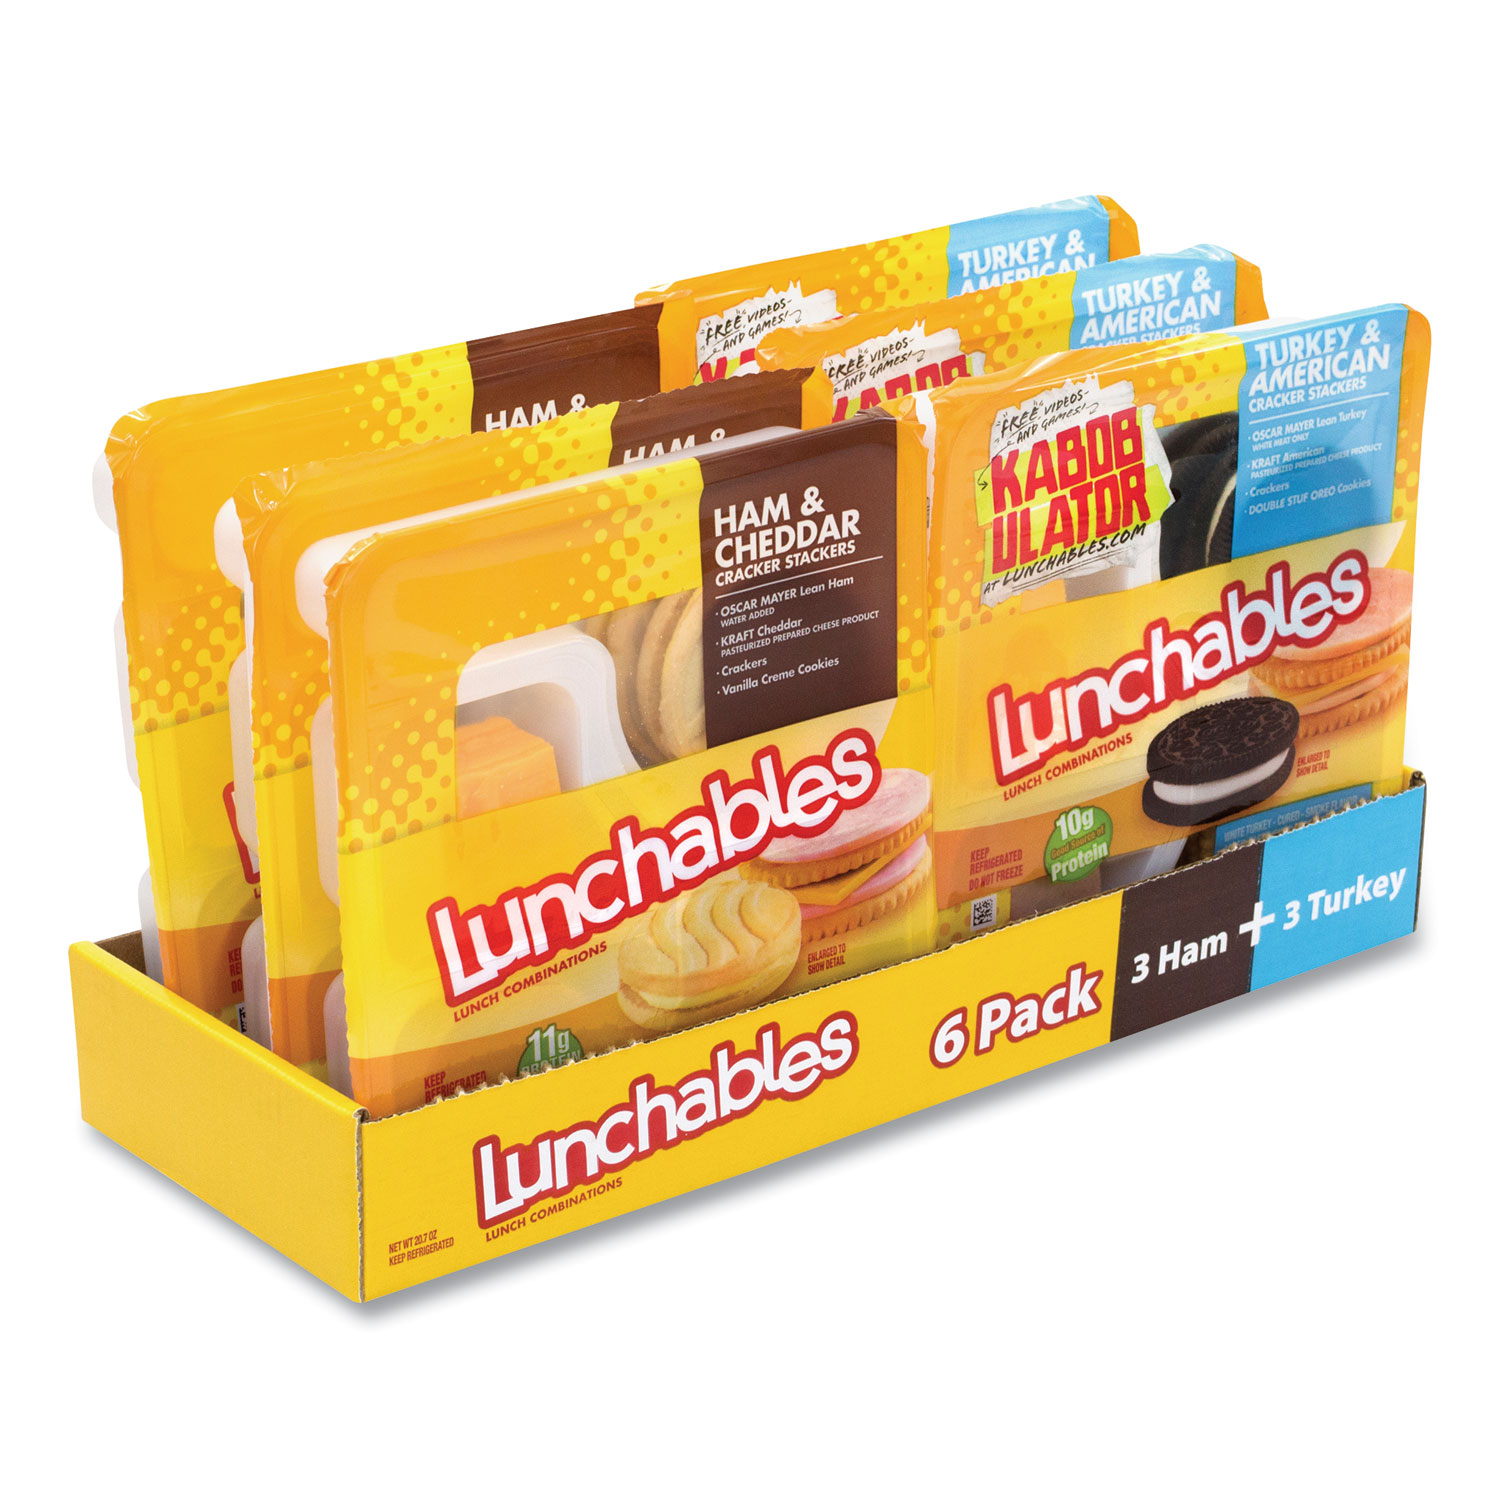 Oscar Mayer Lunchables Variety Pack, Turkey/American and Ham/Cheddar, 6/Box, Free Delivery in 1-4 Business Days